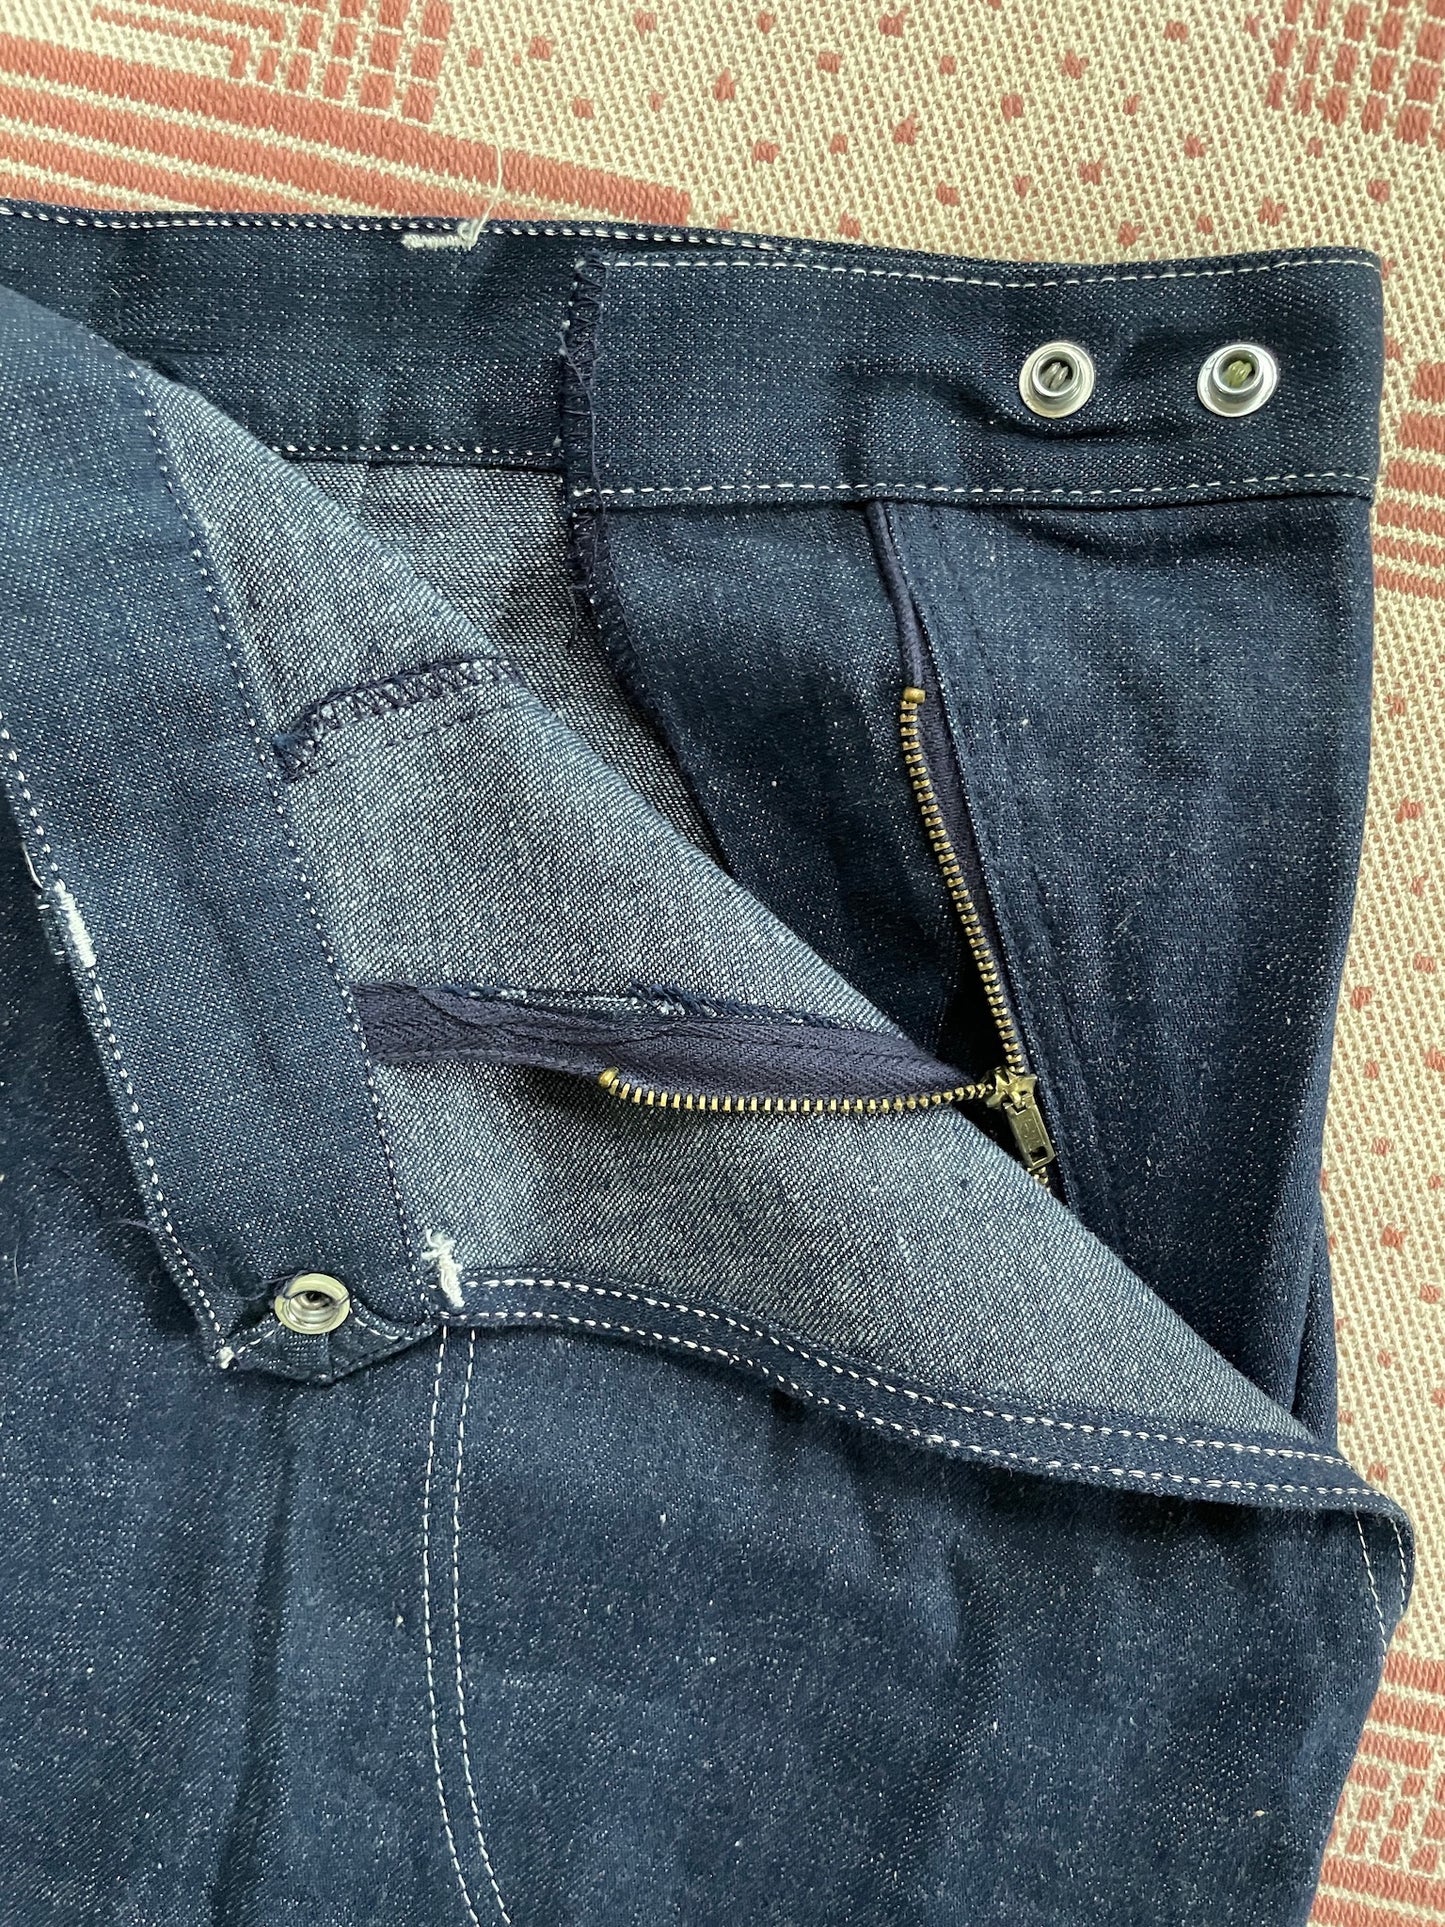 1950s Side Zip Clam Digger Jeans